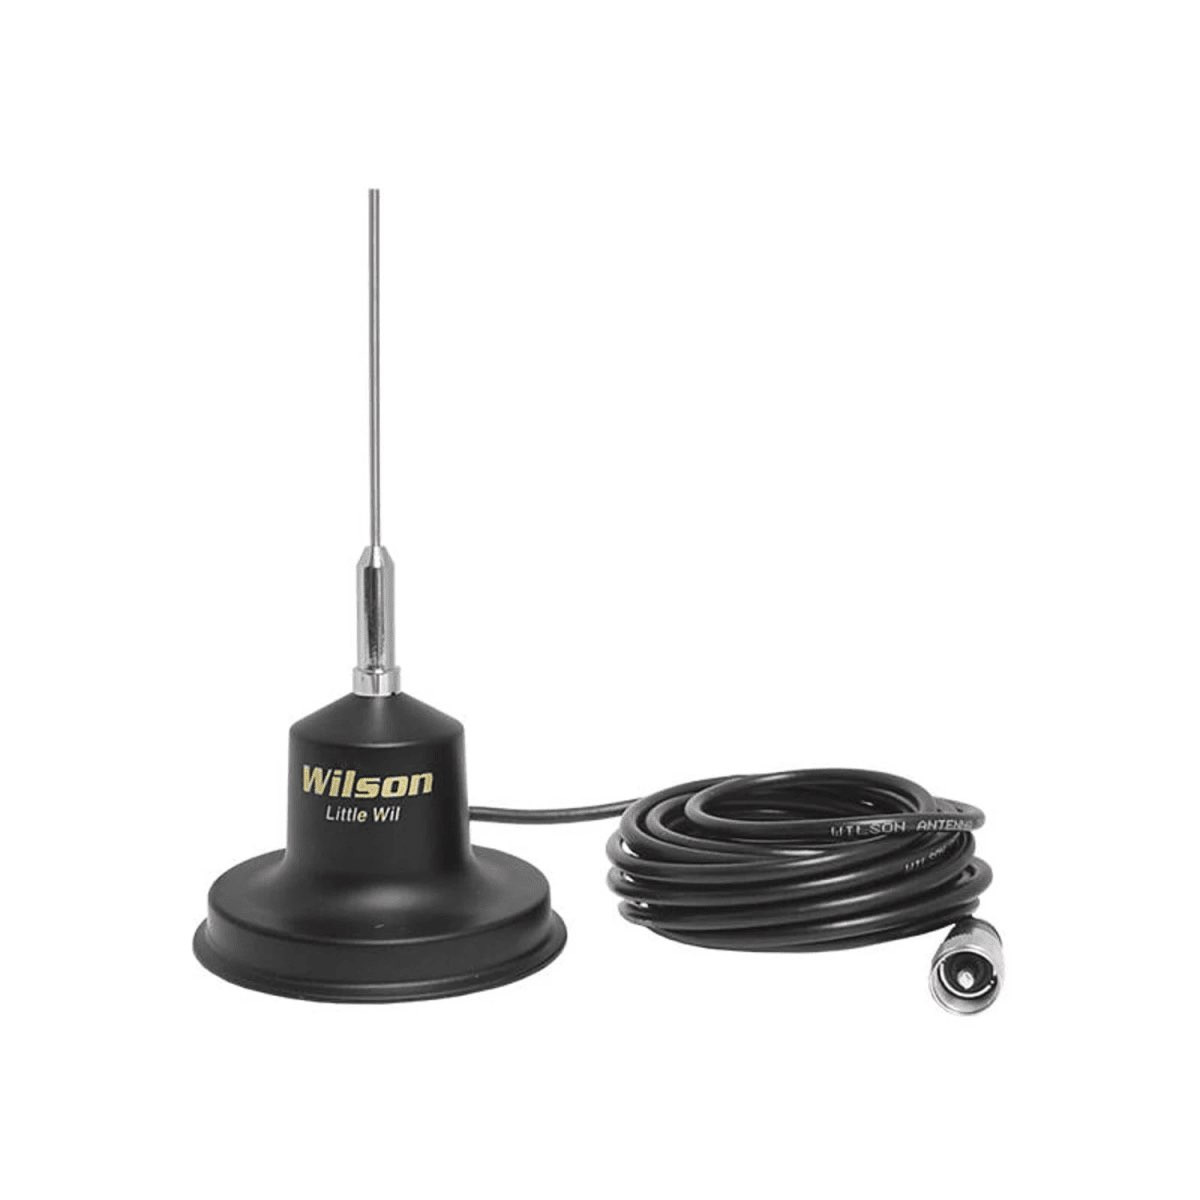 Picture of Astatic Wilson LITTLEWILLBOXED 36 in. Magnetic Mount Antenna Kit